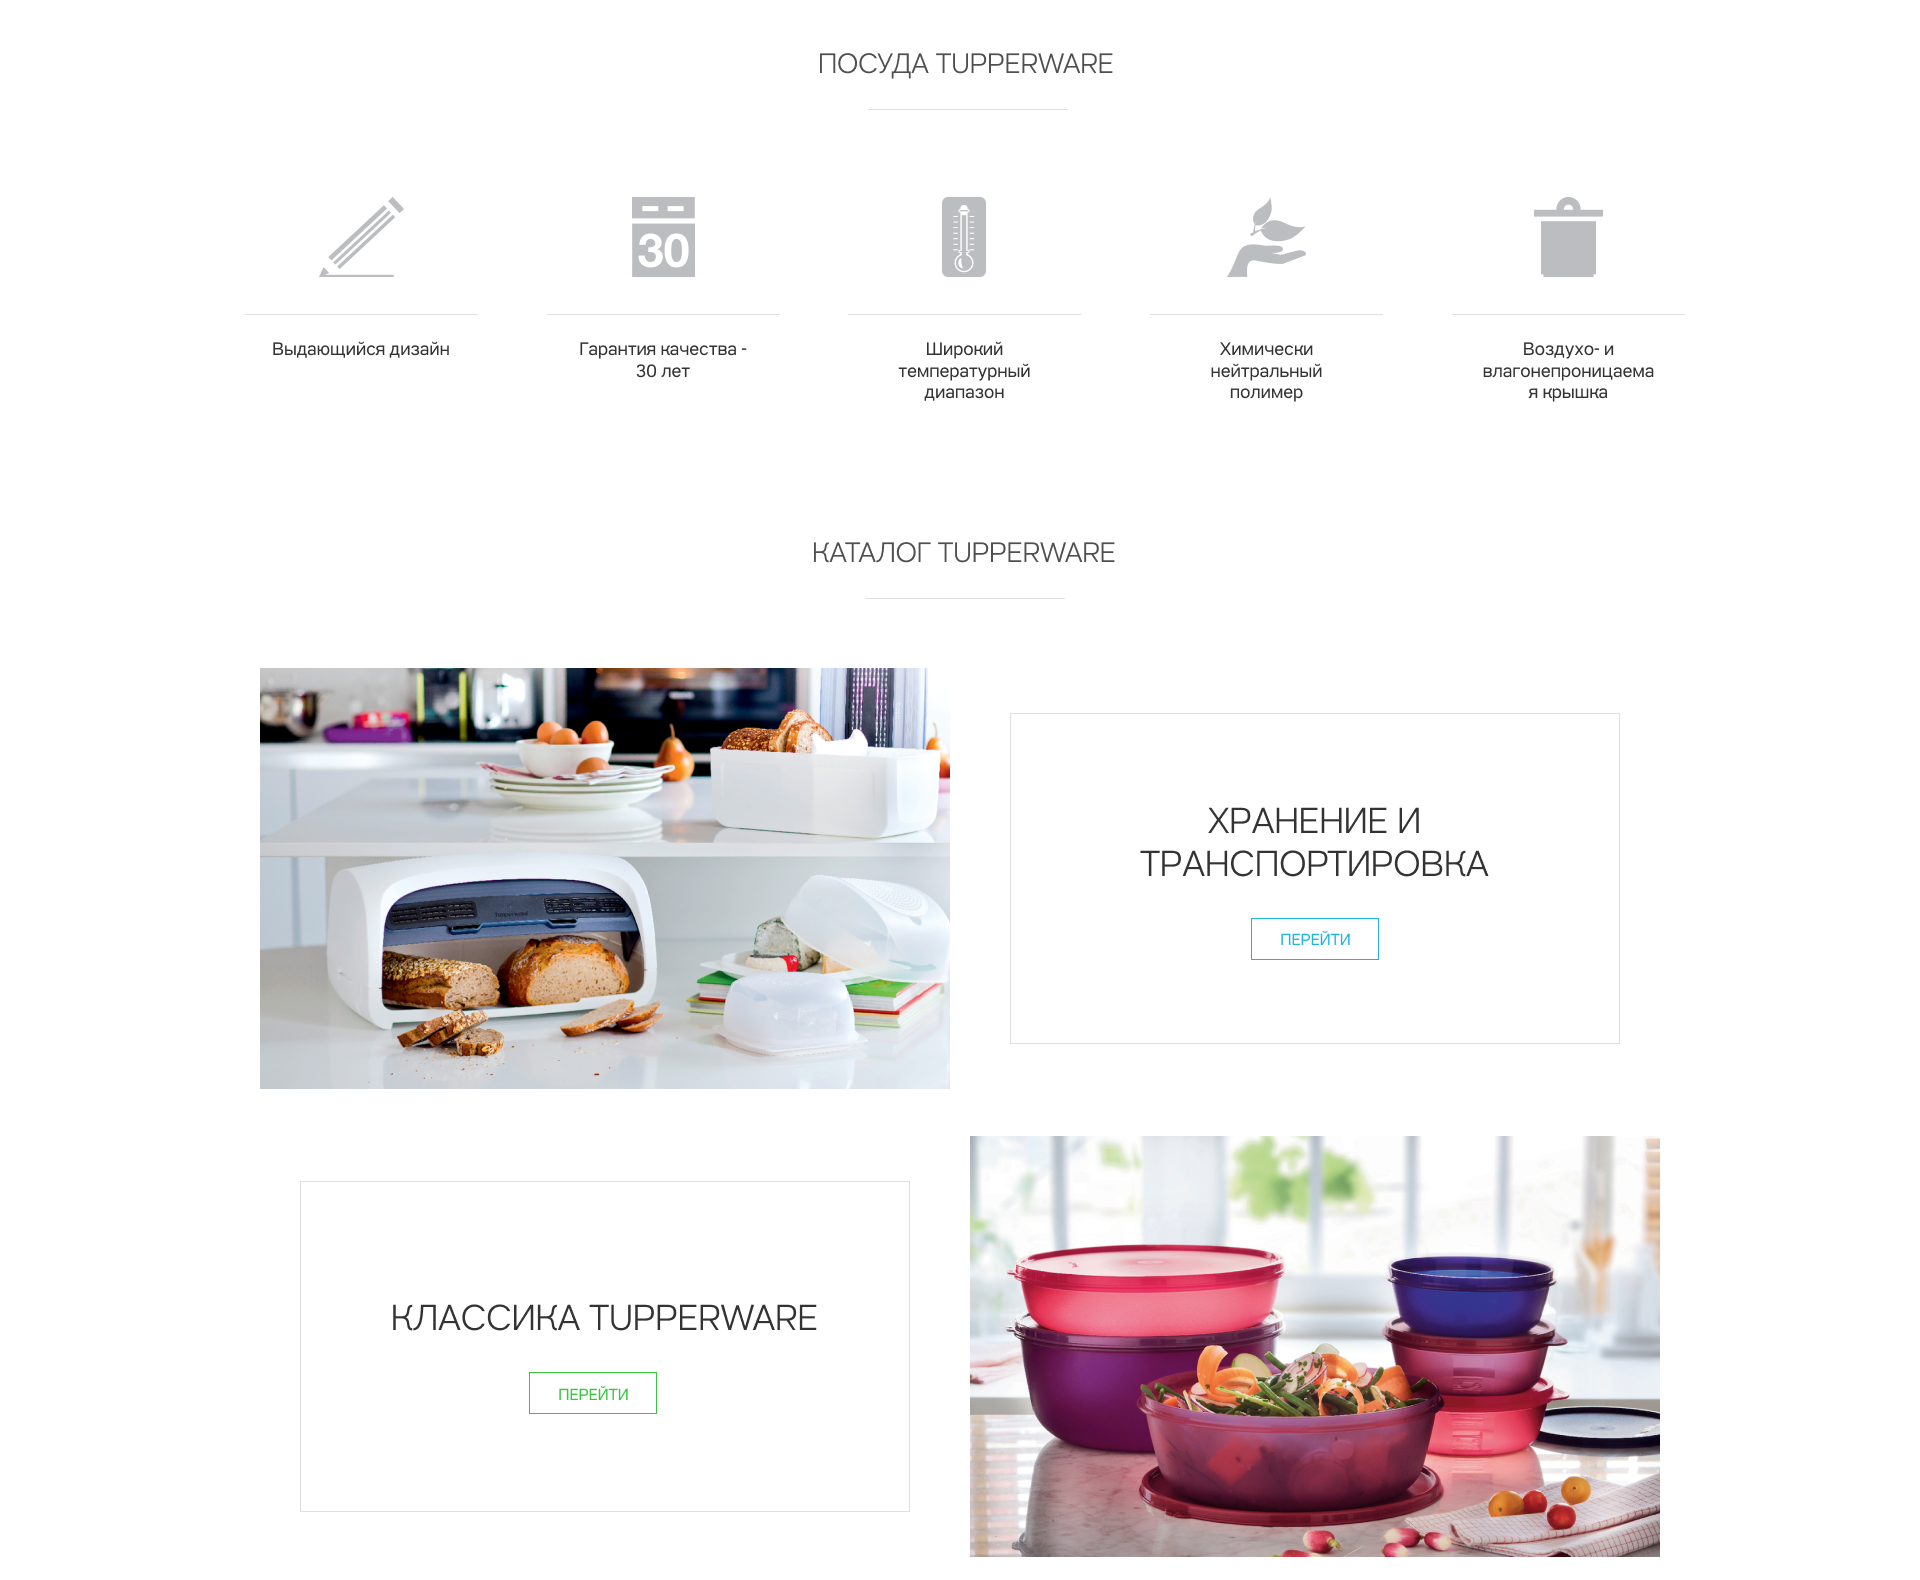 An image showing elements of e-commerce website home page design